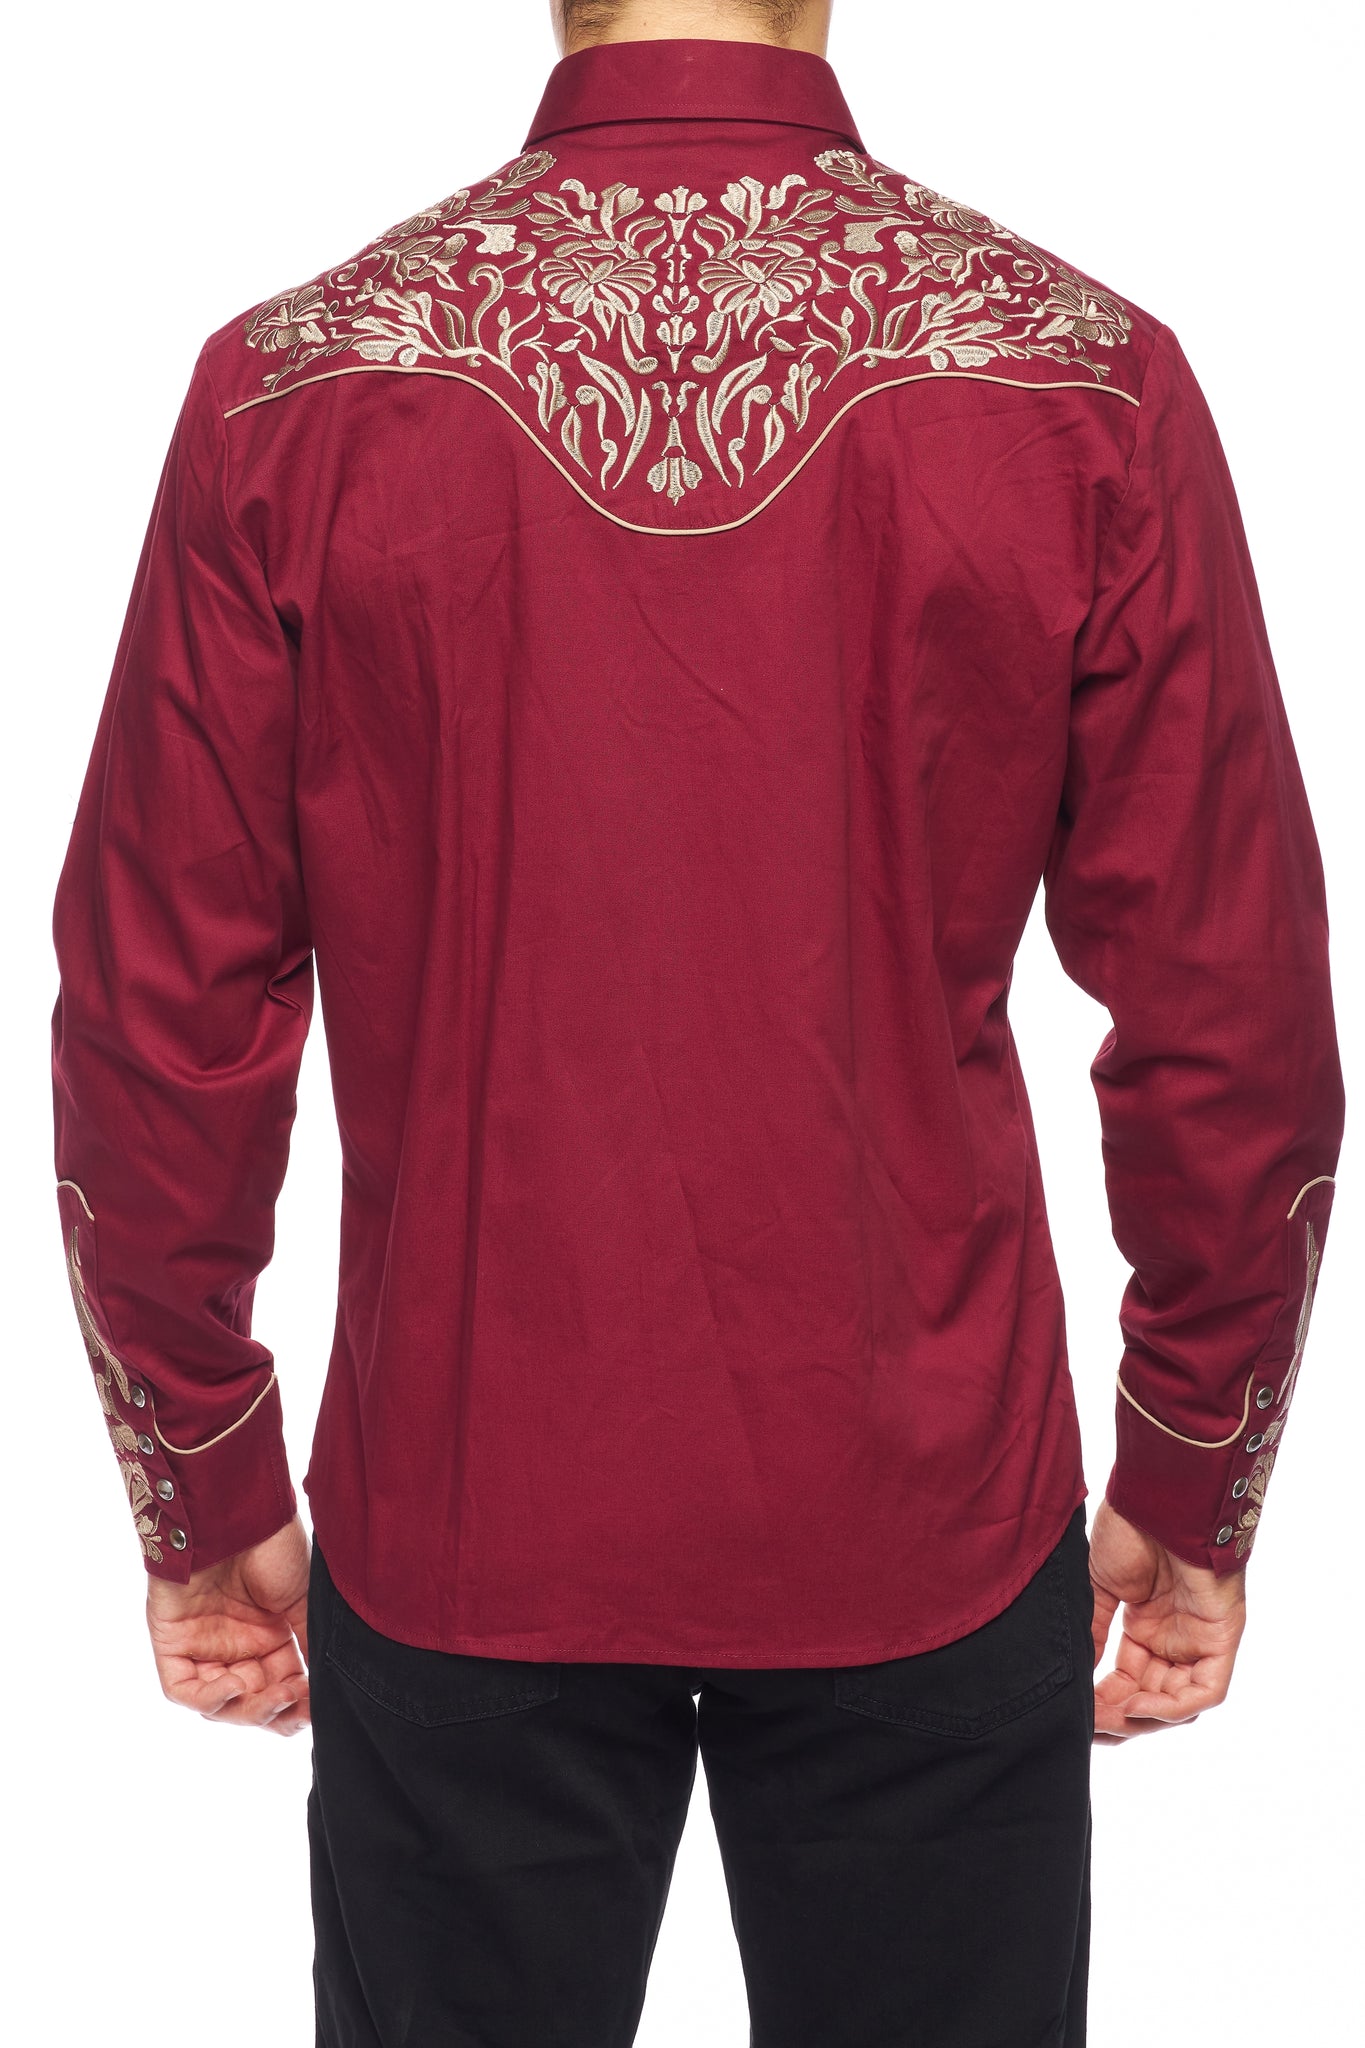 Men's Western Cowboy Embroidery Shirt -PS500L-563